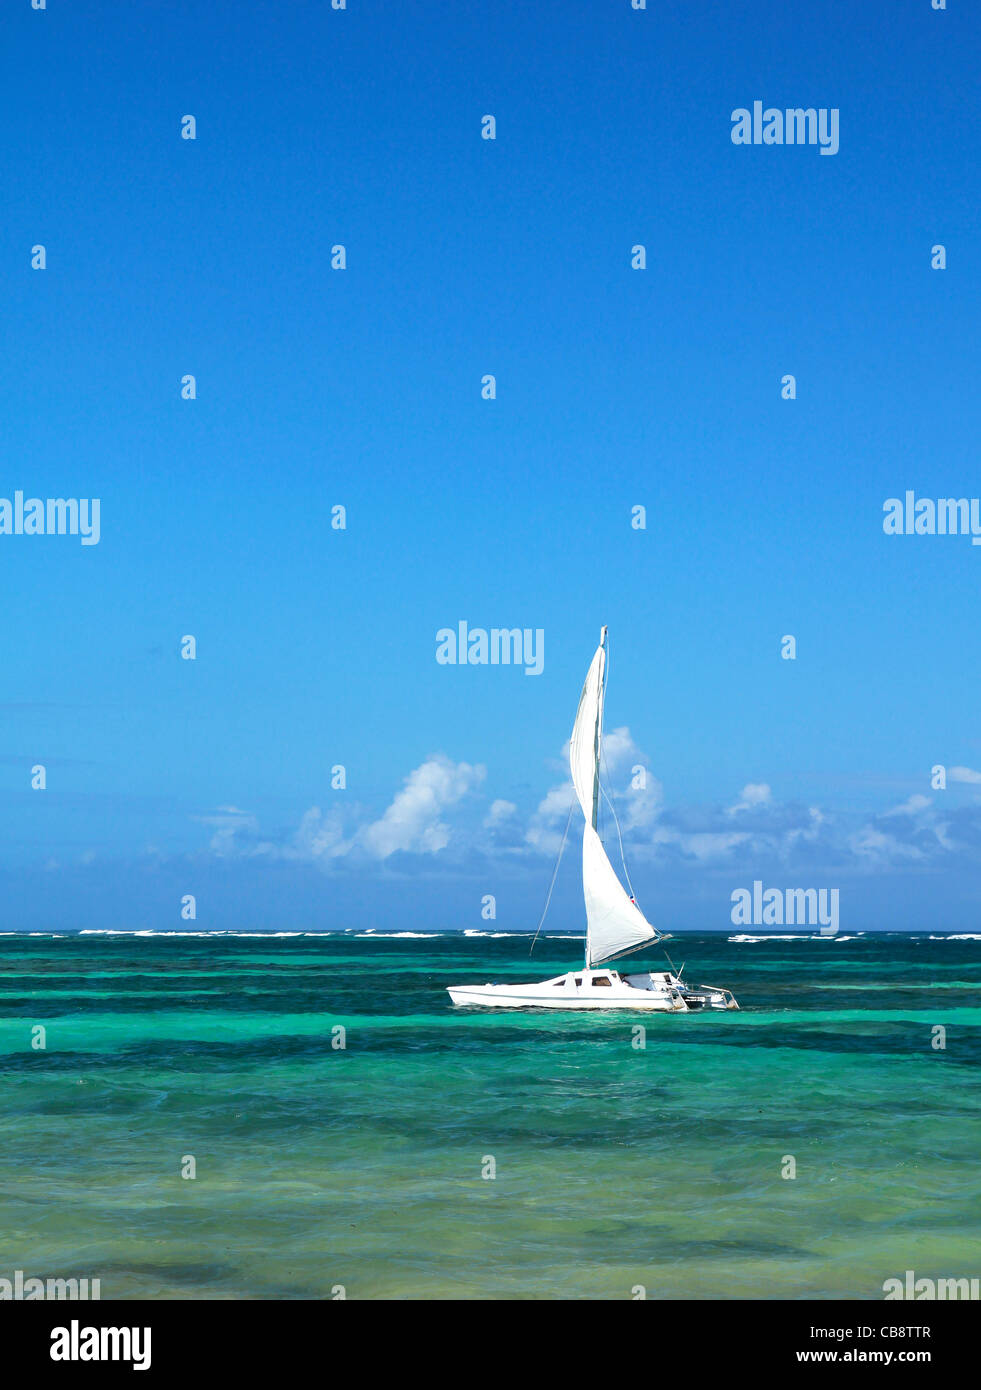 Yacht with sail in caribbean sea Stock Photo